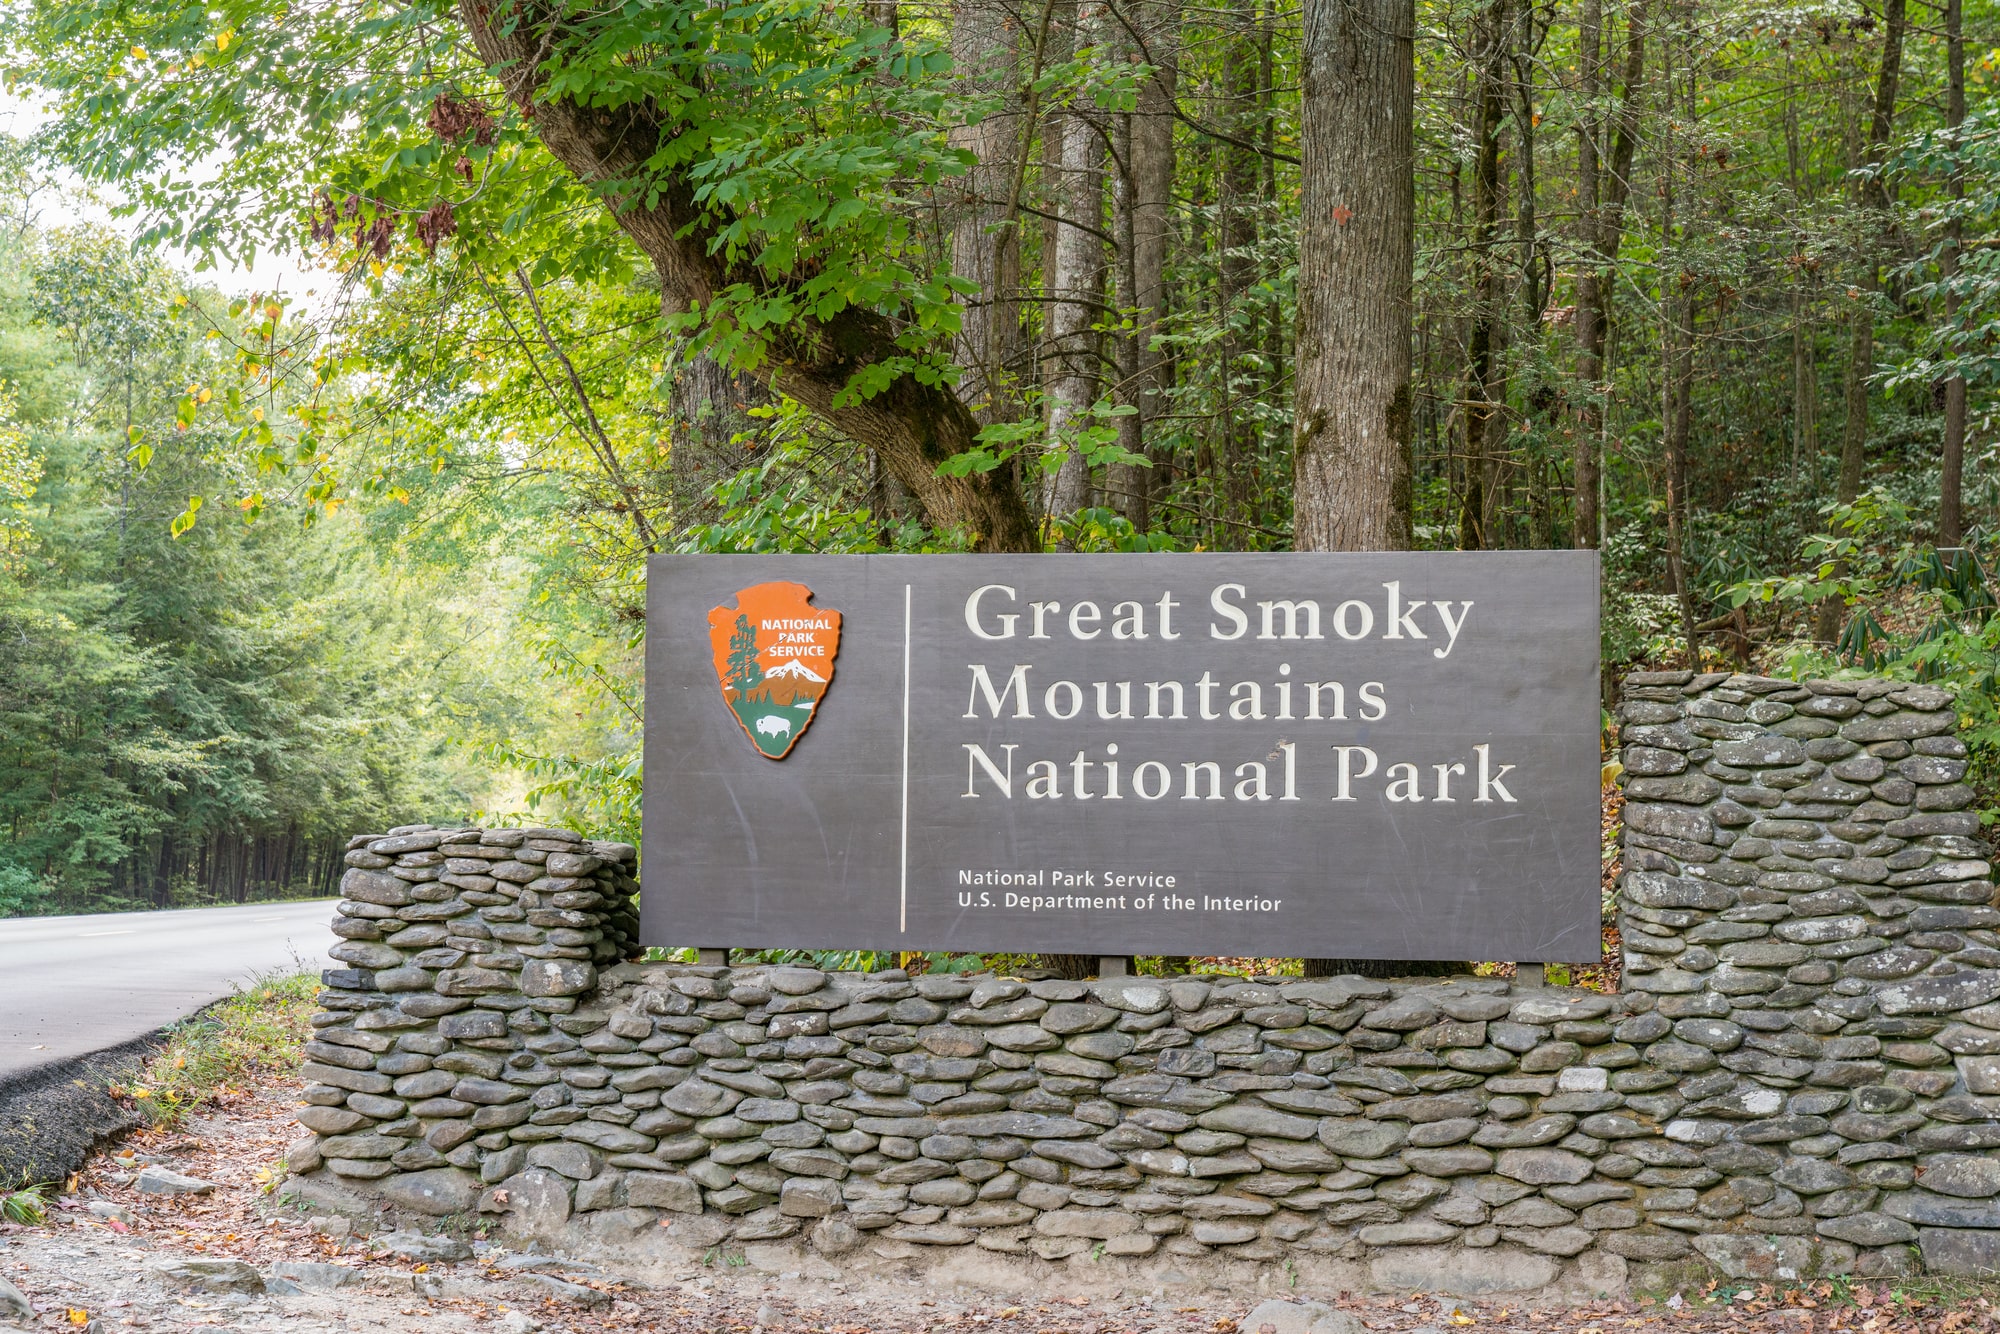 Entrance Sign along the road in Smoky Mountains National Park